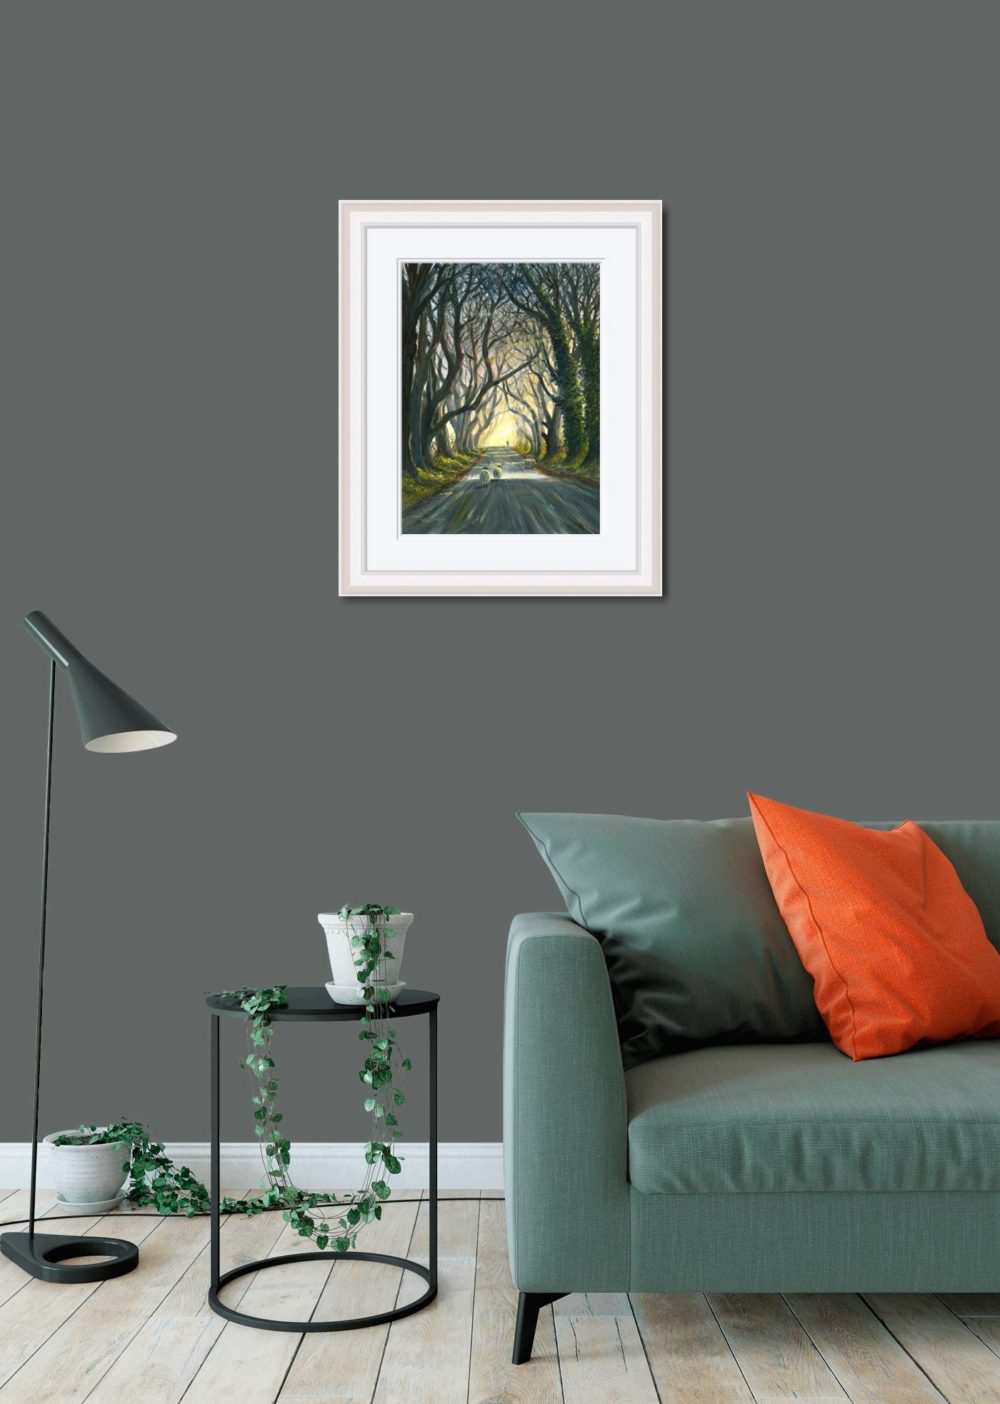 The Dark Hedges Print (Small) In White Frame In Room